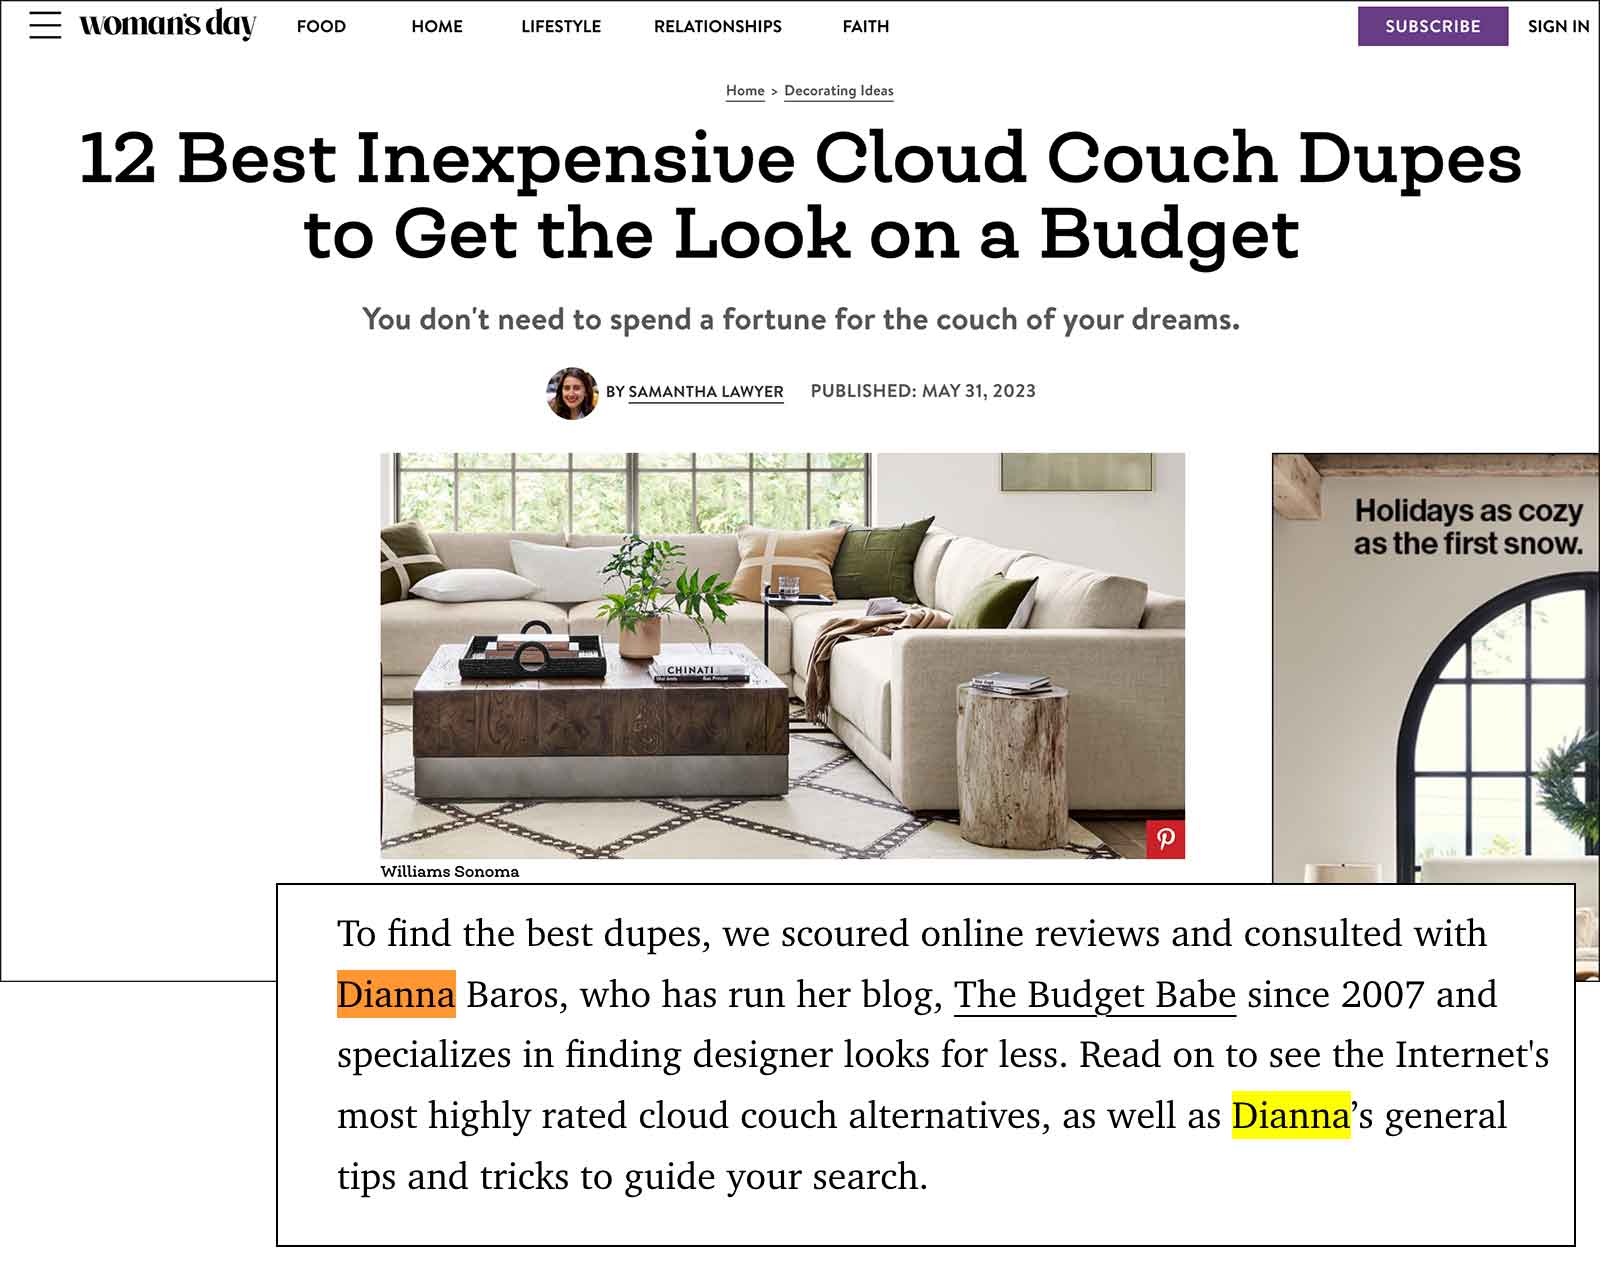 Woman's Day magazine rounds up the best Cloud Couch dupes.